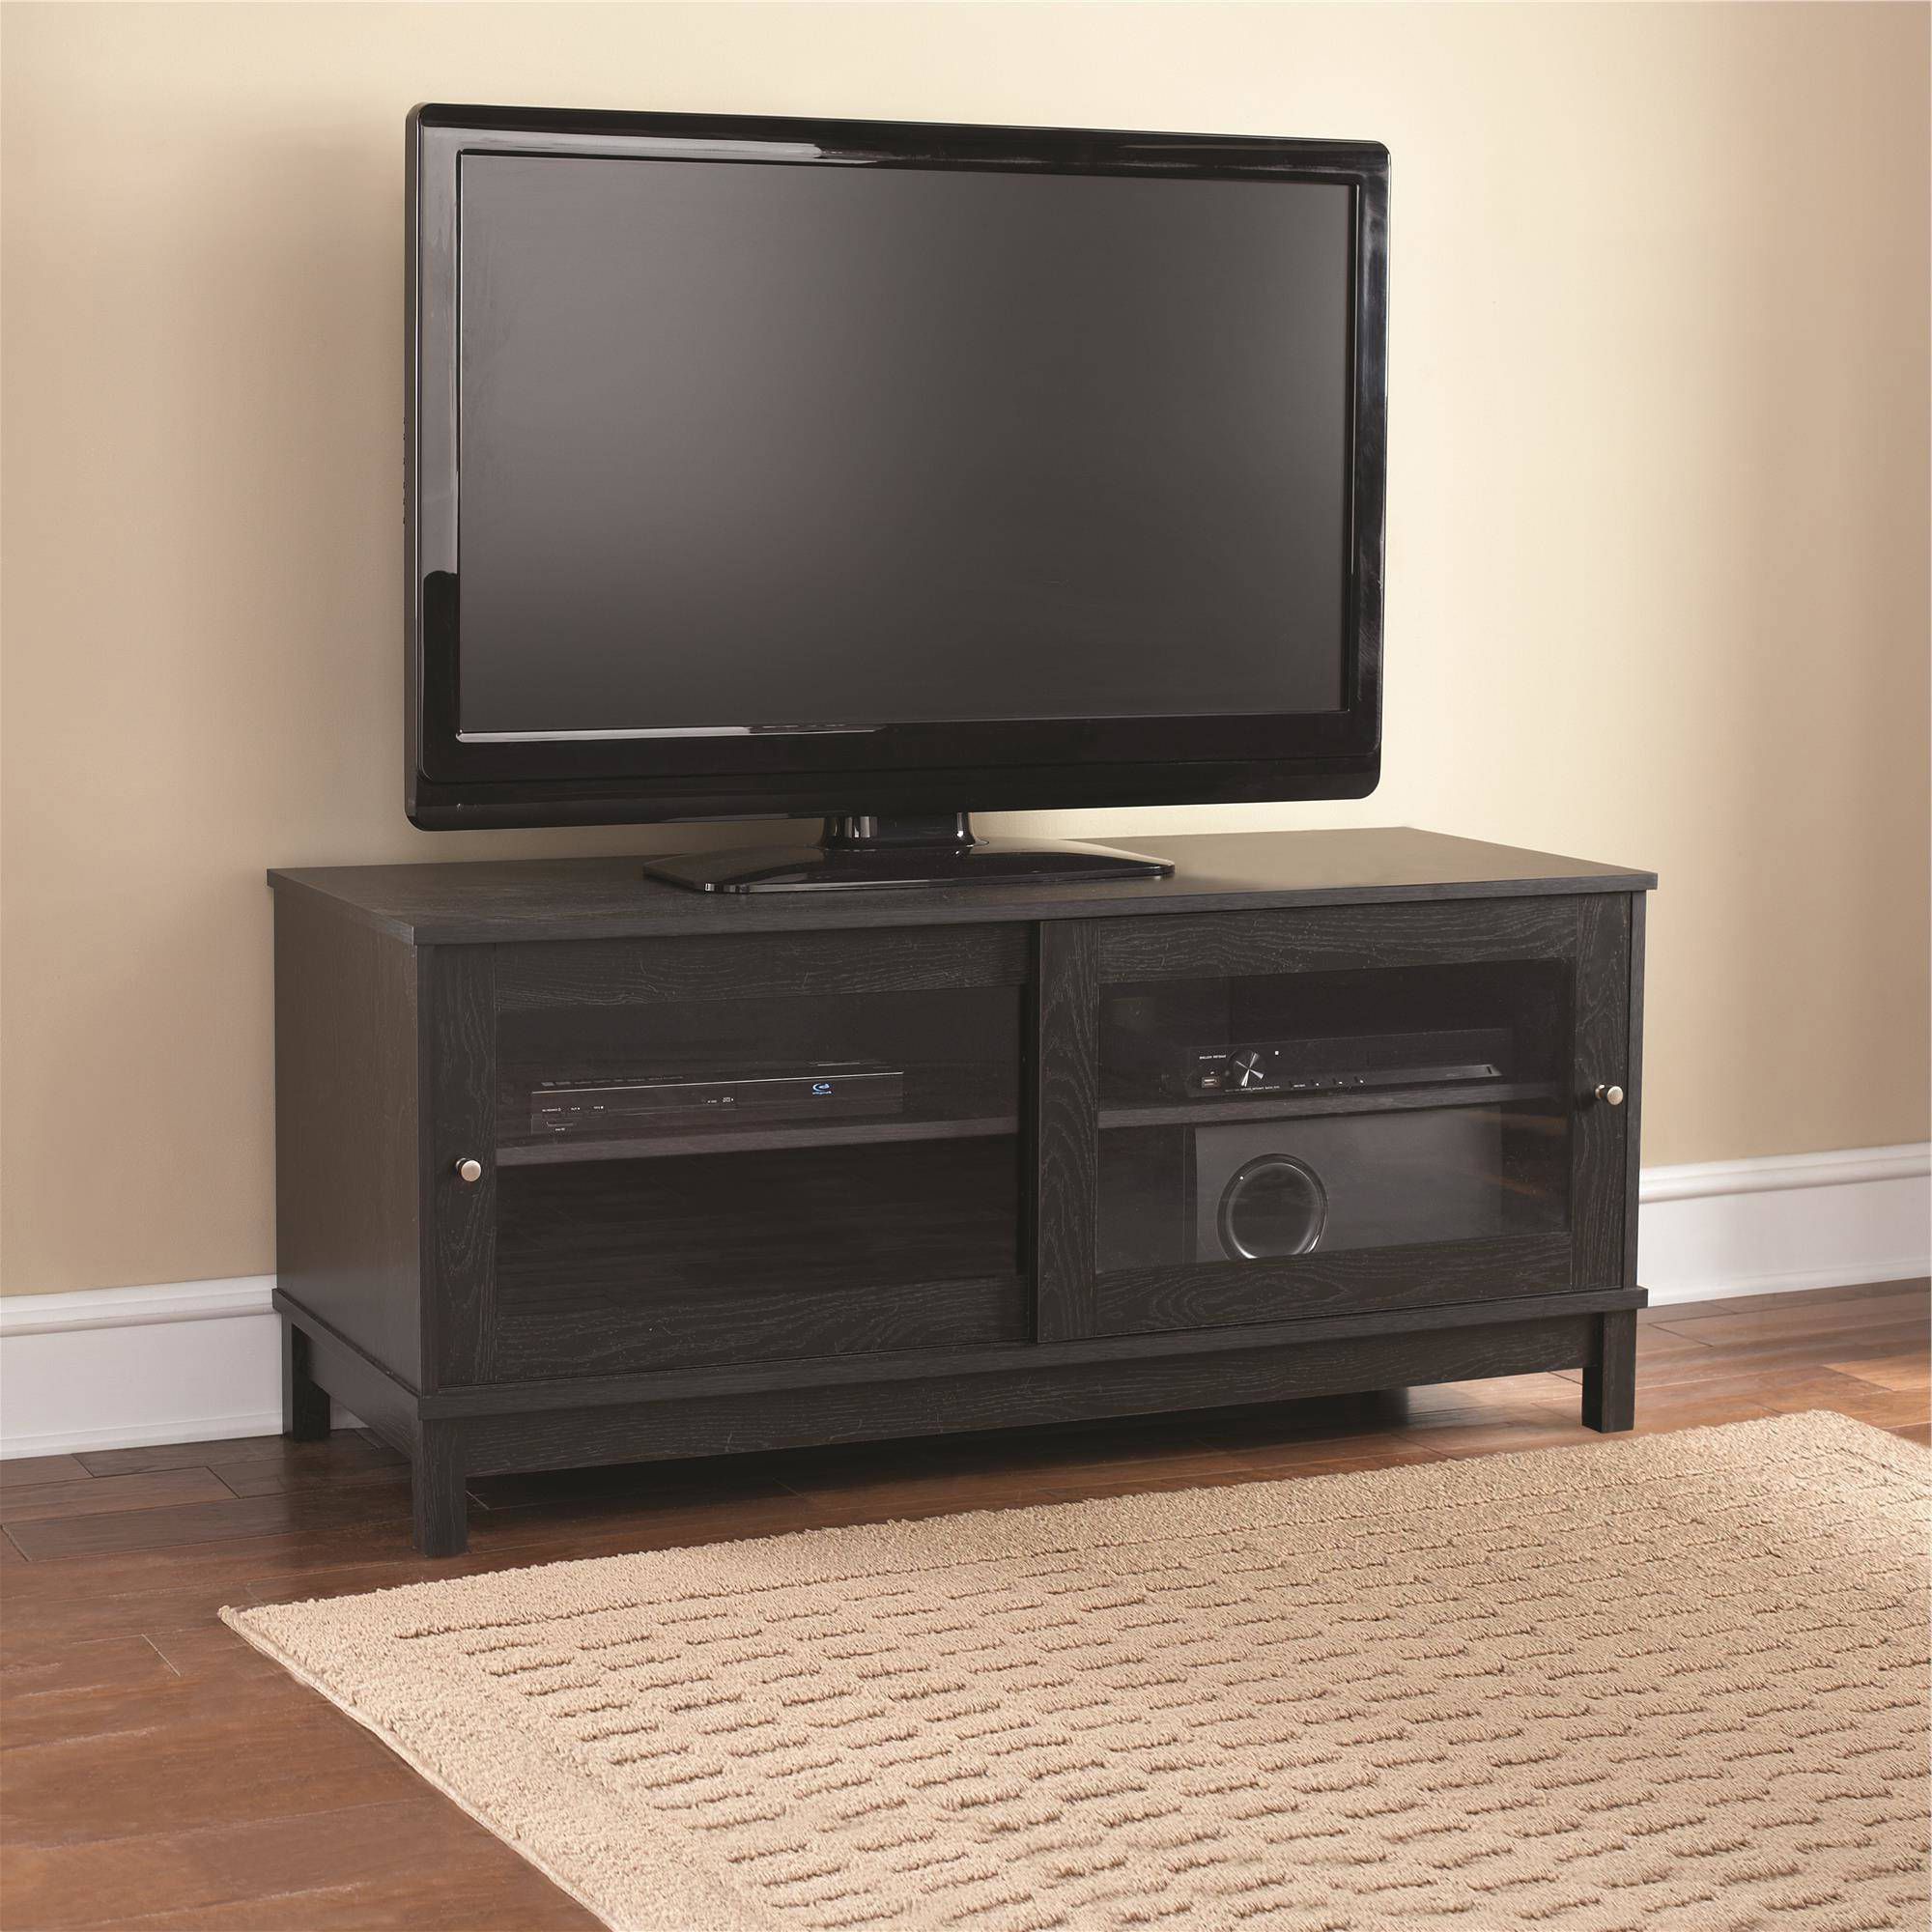 Black Tv Stand With Glass Doors In Most Current Mainstays 55" Tv Stand With Sliding Glass Doors, Multiple Colors (View 1 of 20)